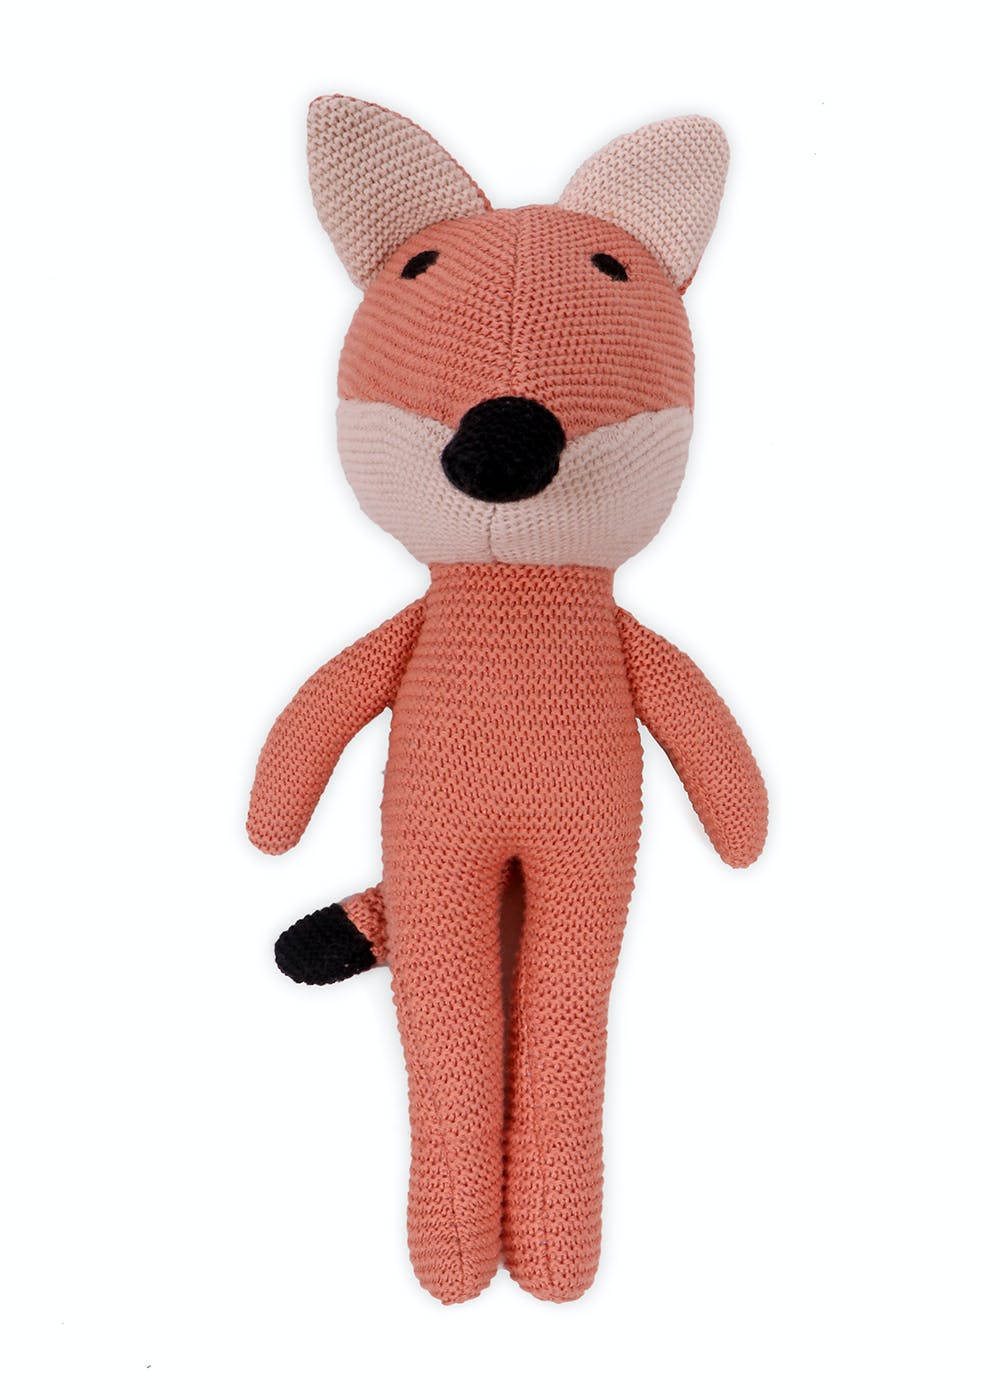 Get Jolly Fox Mustard/Natural Color Cotton Knitted Stuffed Toy at ₹ 999 |  LBB Shop